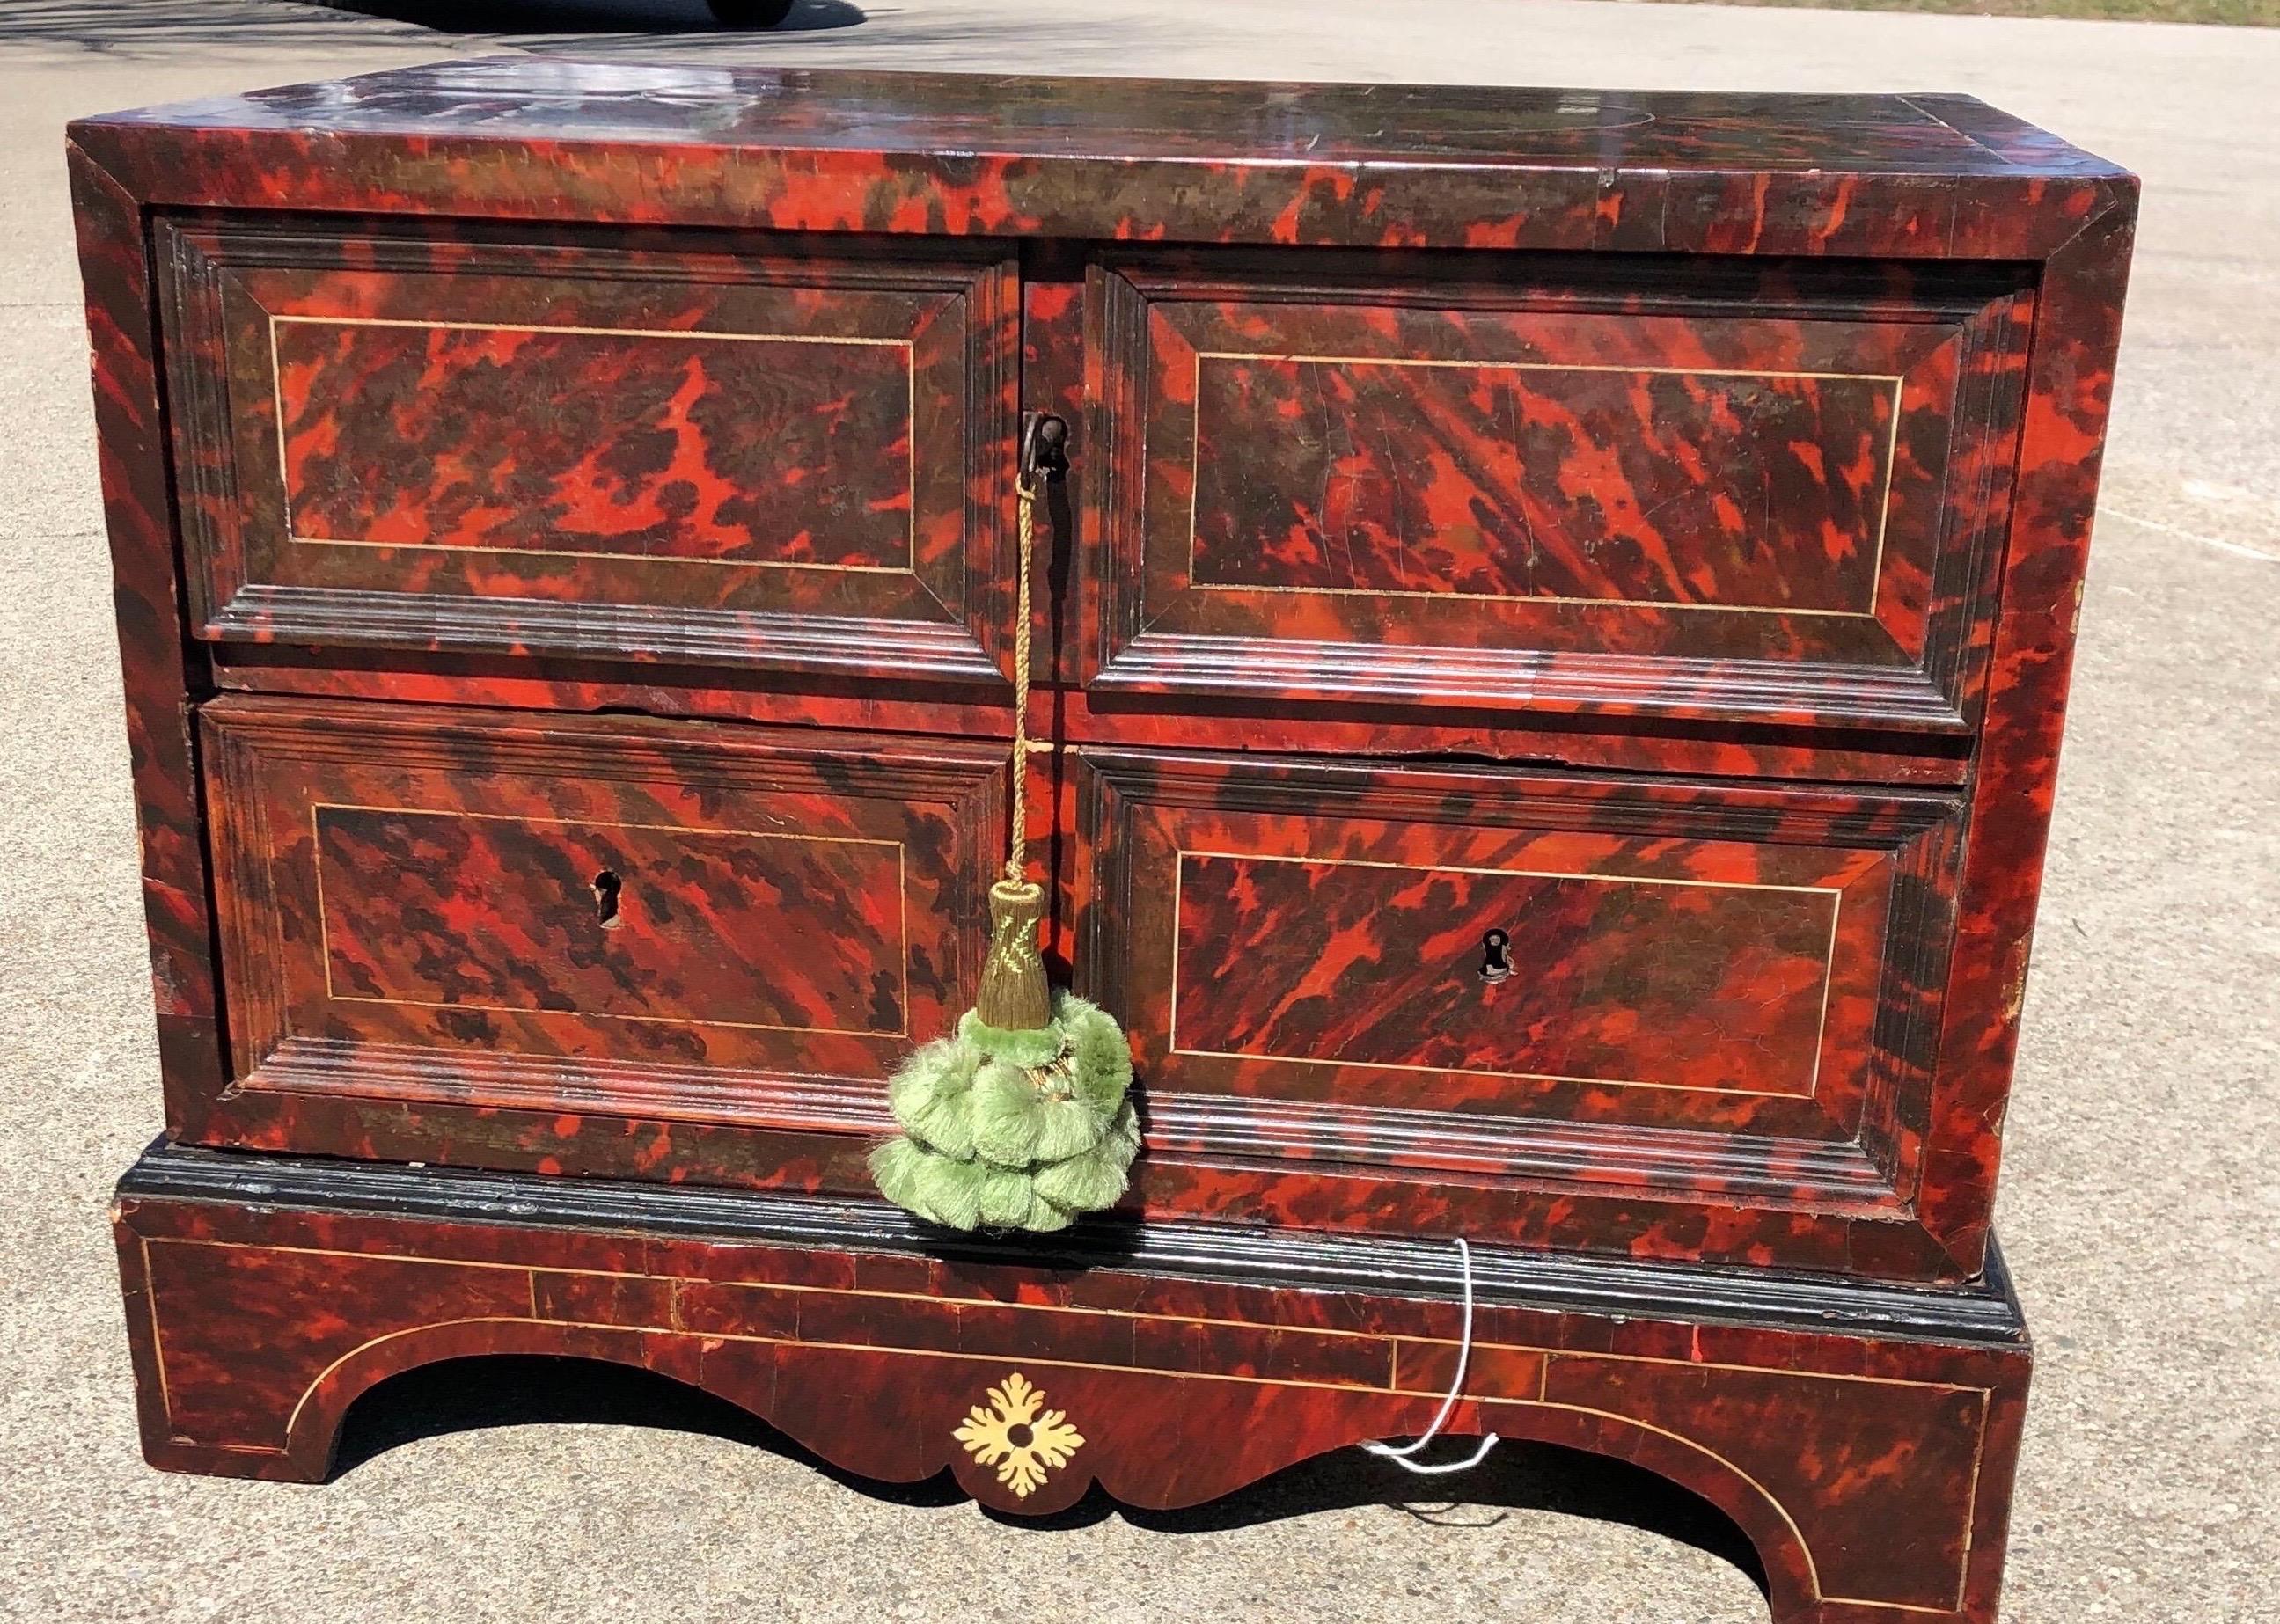 Late 18th century Anglo Portuguese tortoiseshell collectors cabinet on frame.